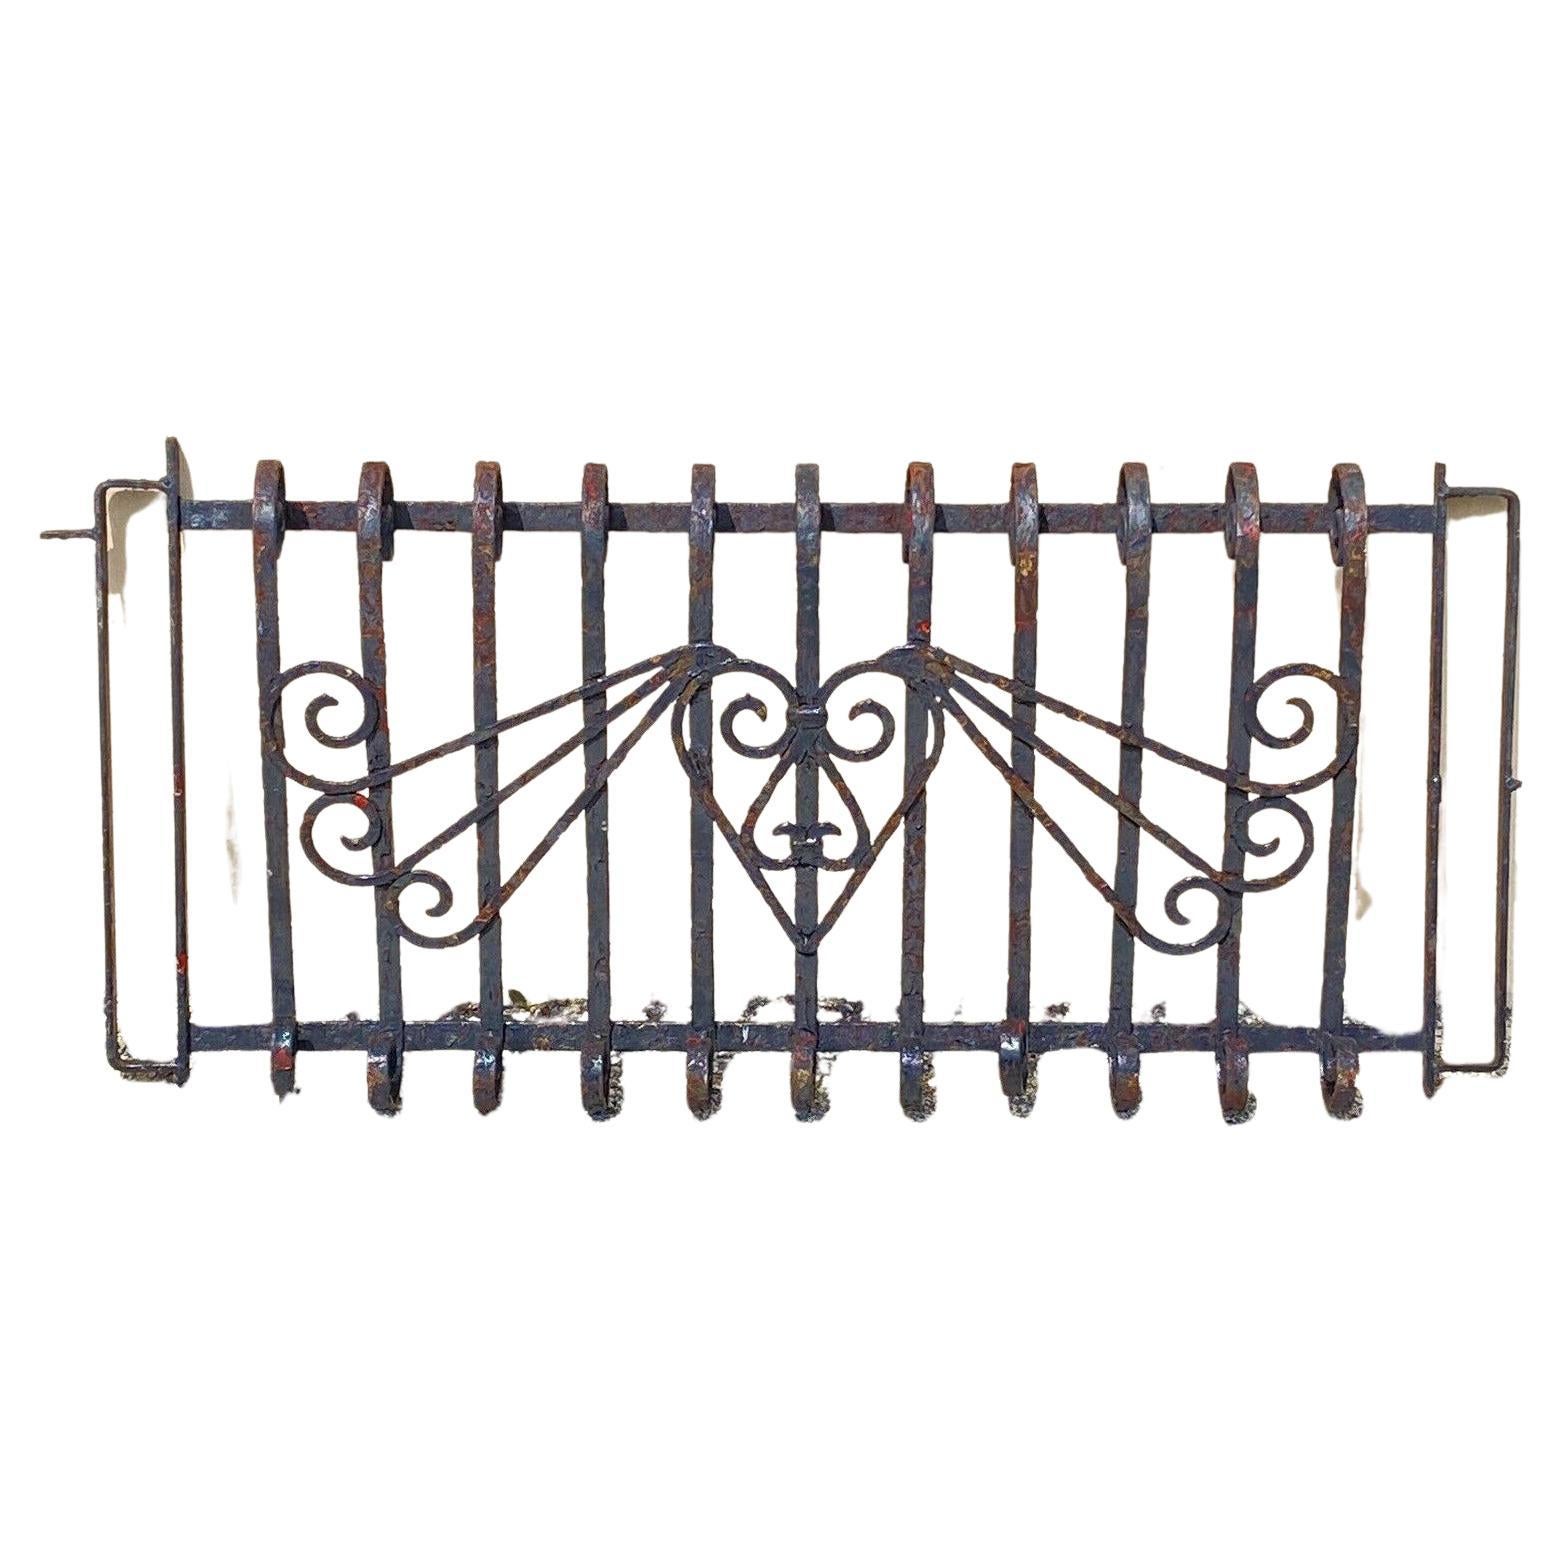 Antique Art Nouveau Black Wrought Iron Heart and Scroll Garden Fence Gate For Sale